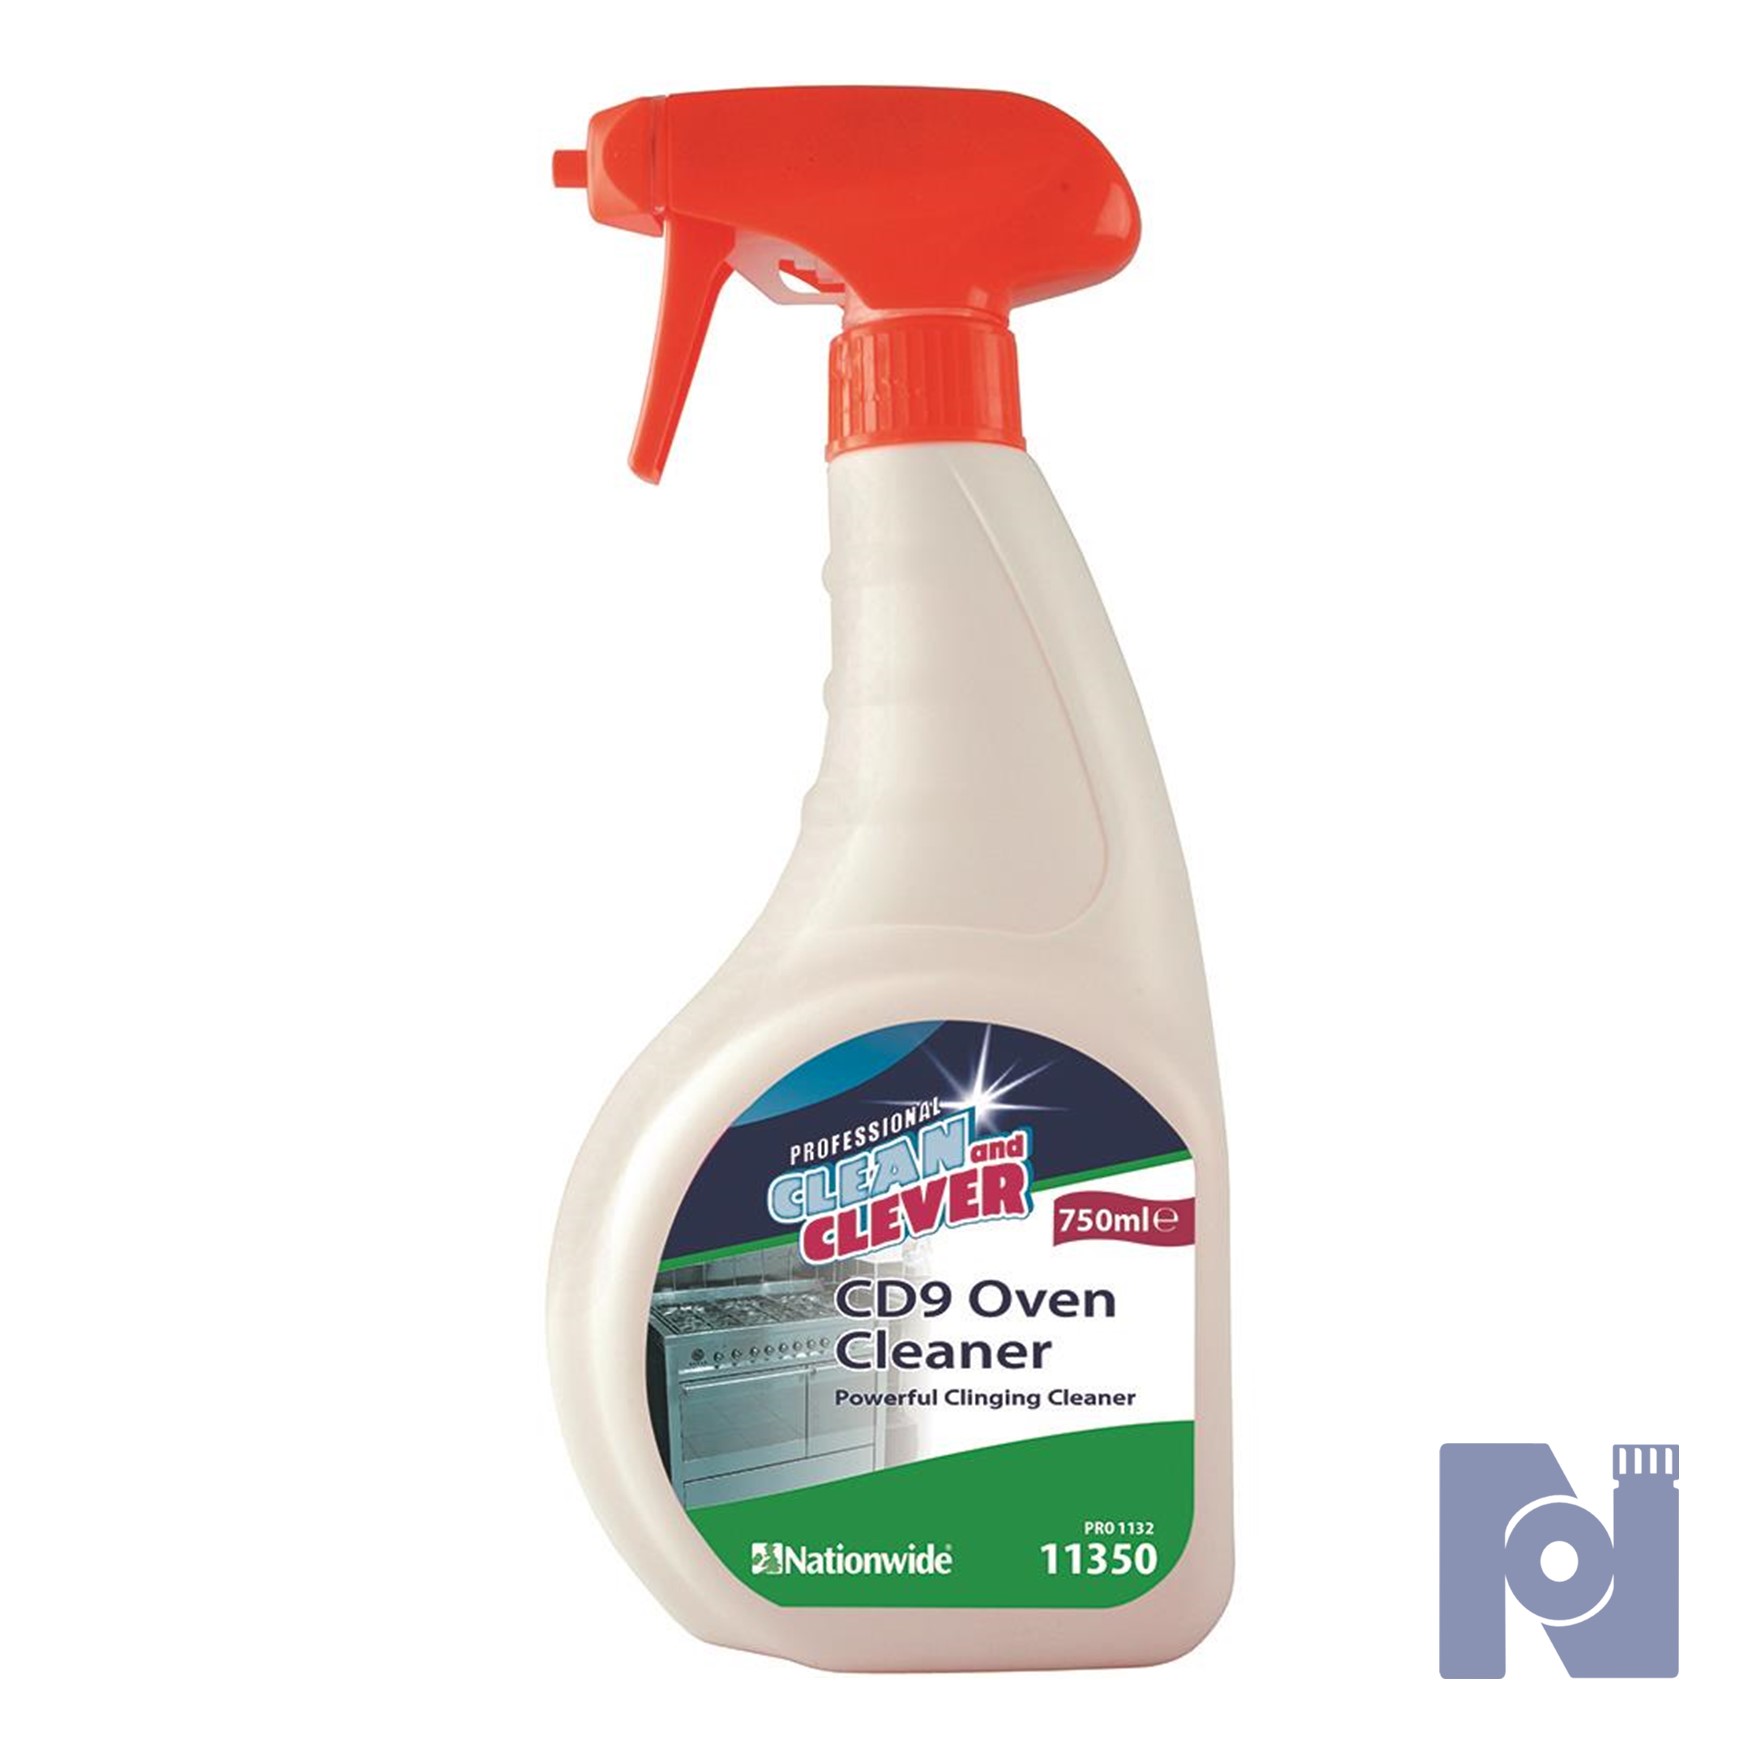 Clean & Clever CD9 Oven Cleaner